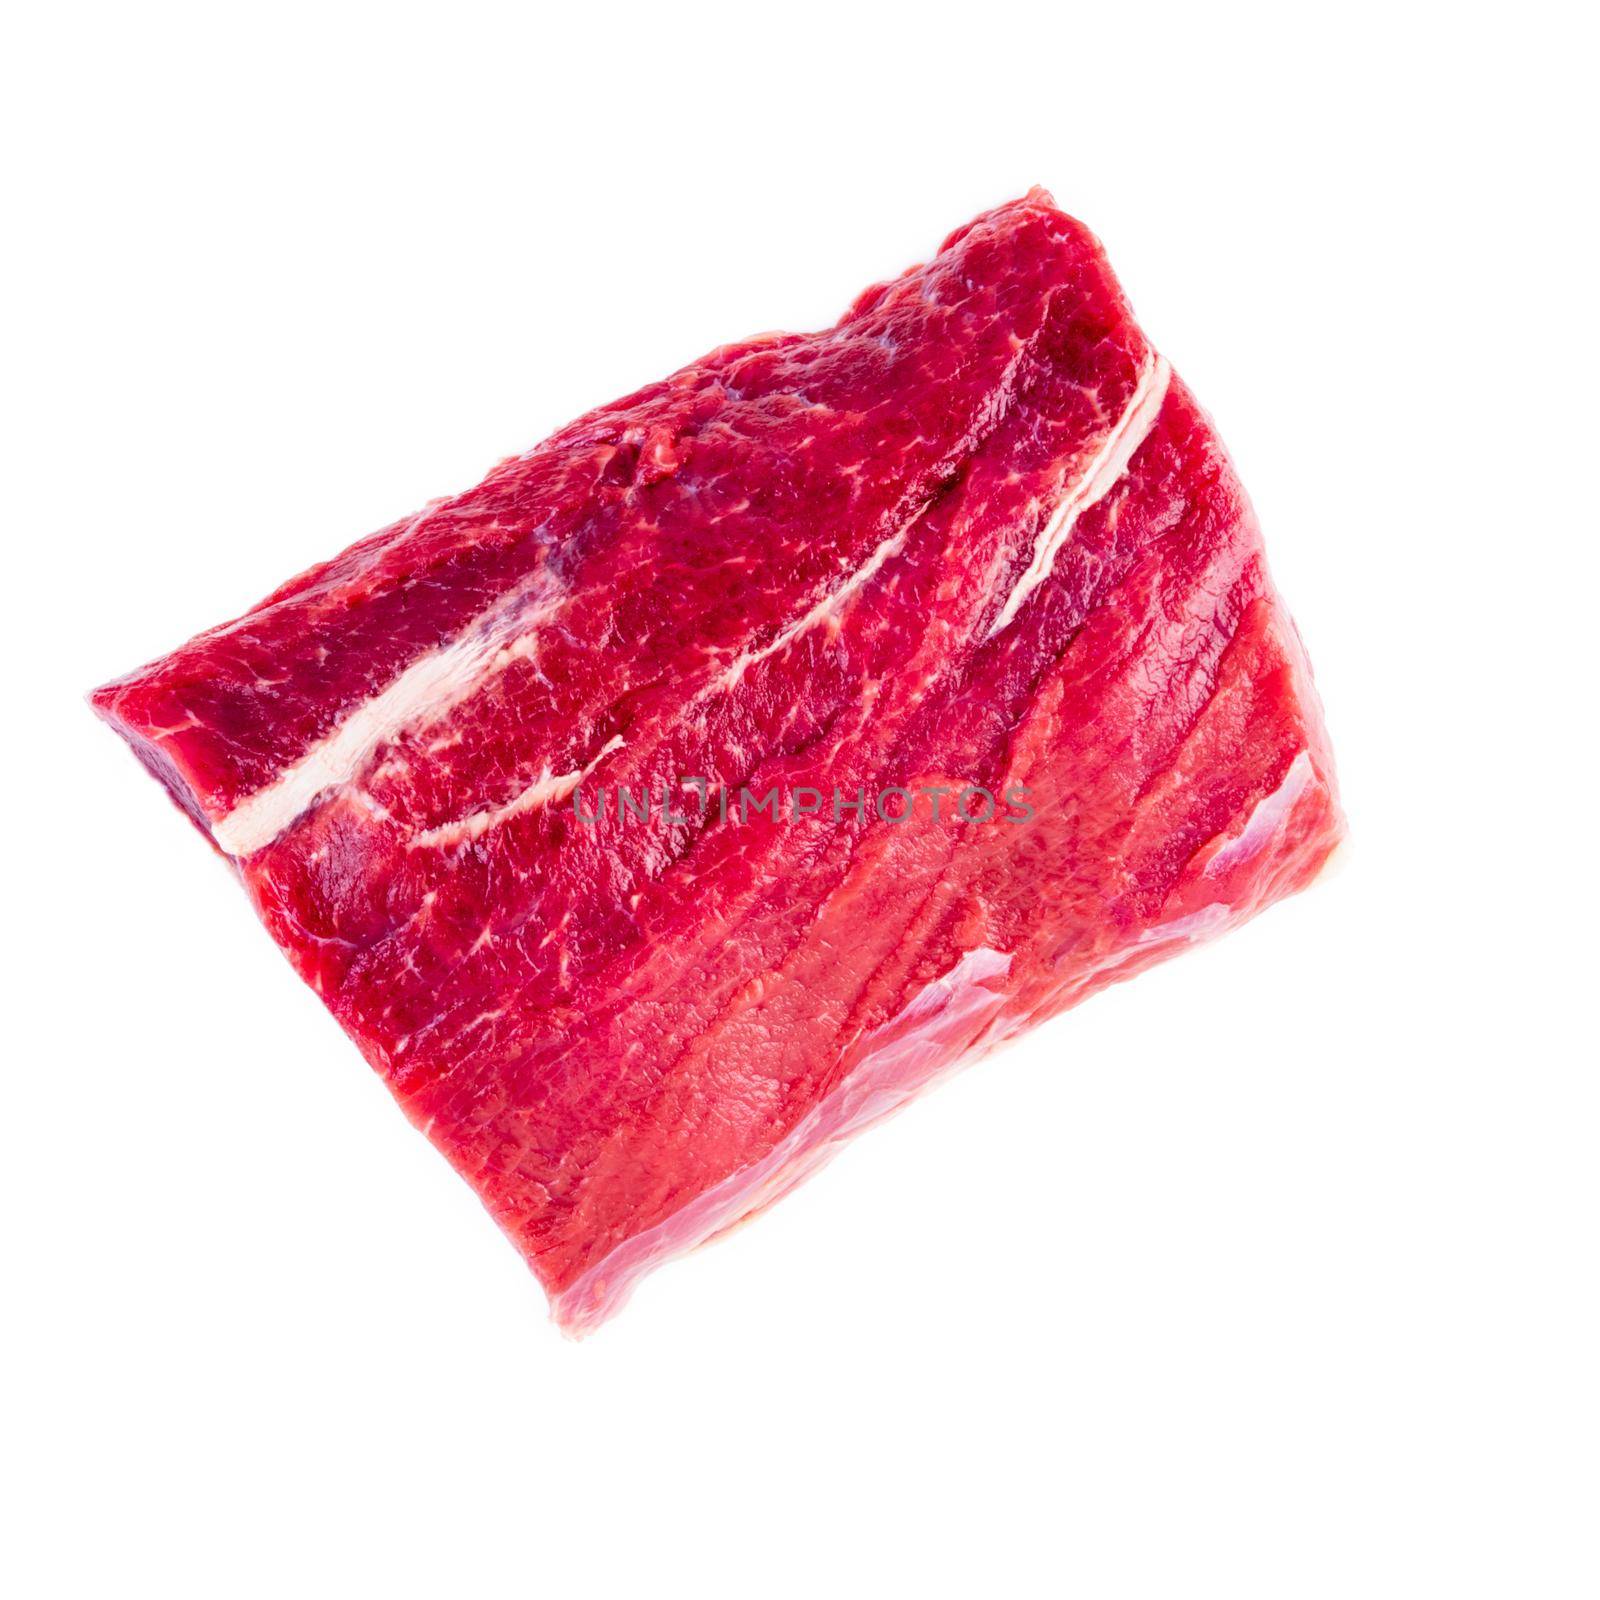 large piece of meat, raw beef fillet isolated on white background. Striploin, top view by NataBene